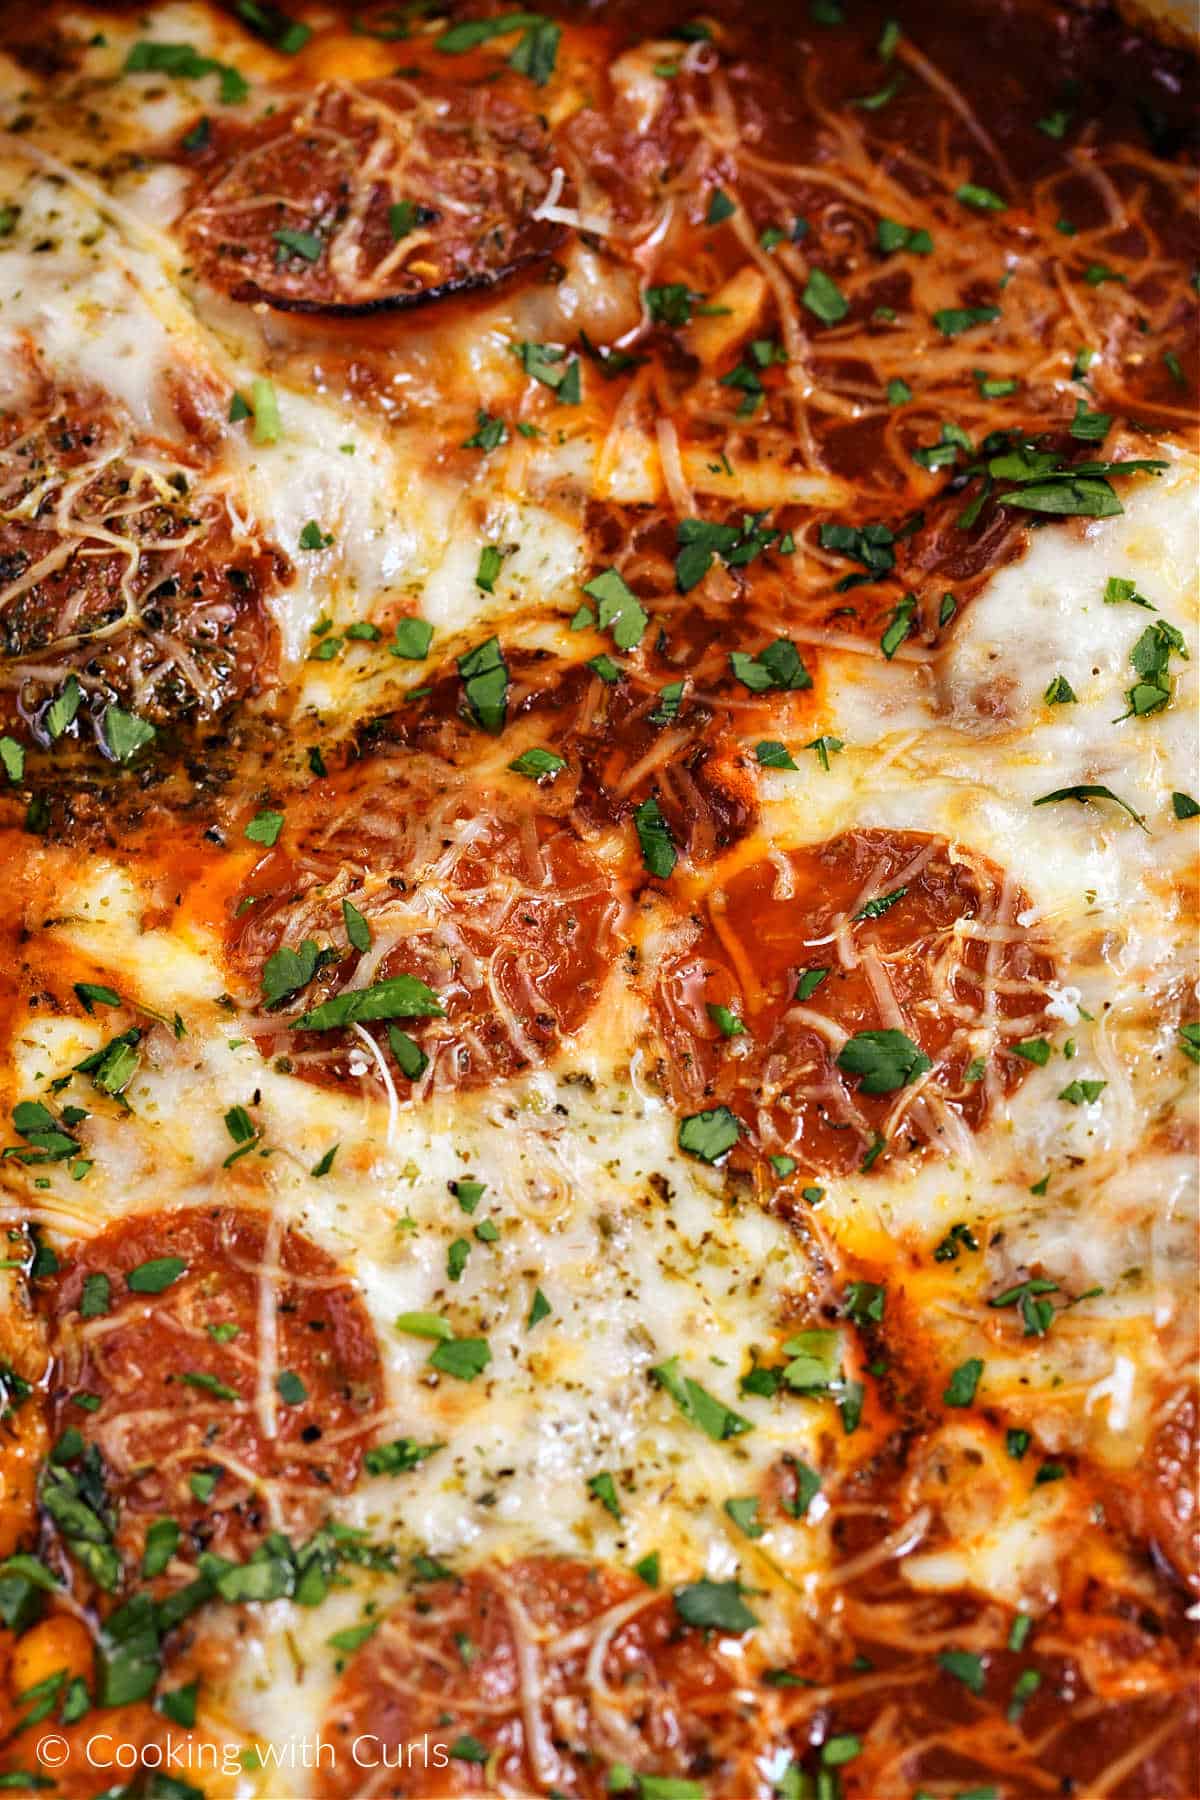 Chicken breasts topped with melted cheese, slices of pepperoni, grated parmesan and chopped parsley.